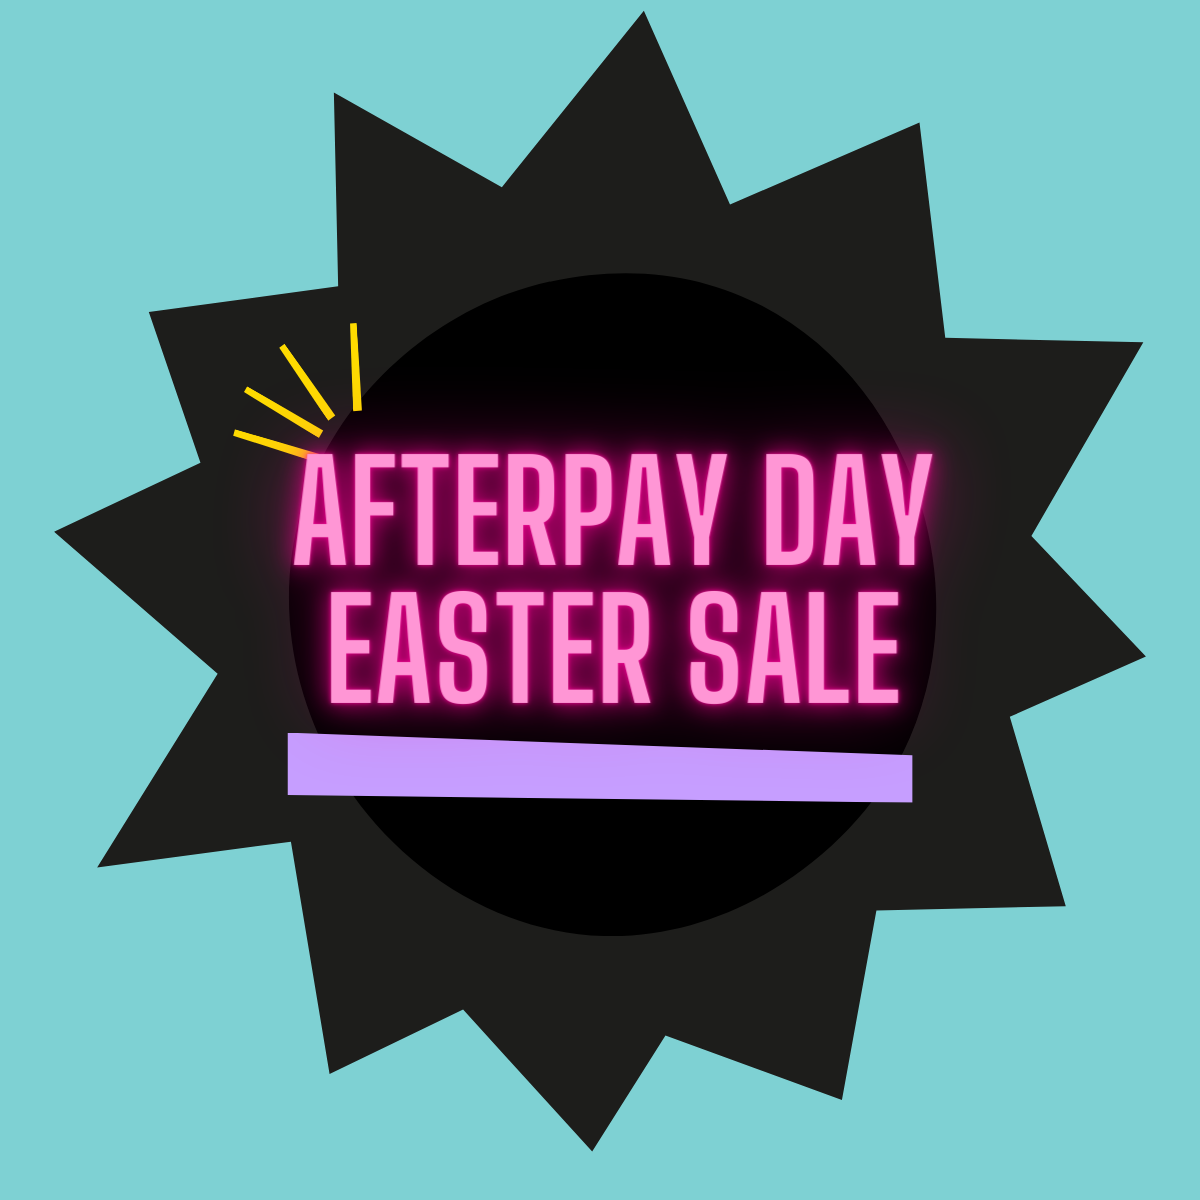 AFTERPAY DAY 25% OFF EASTER SALE